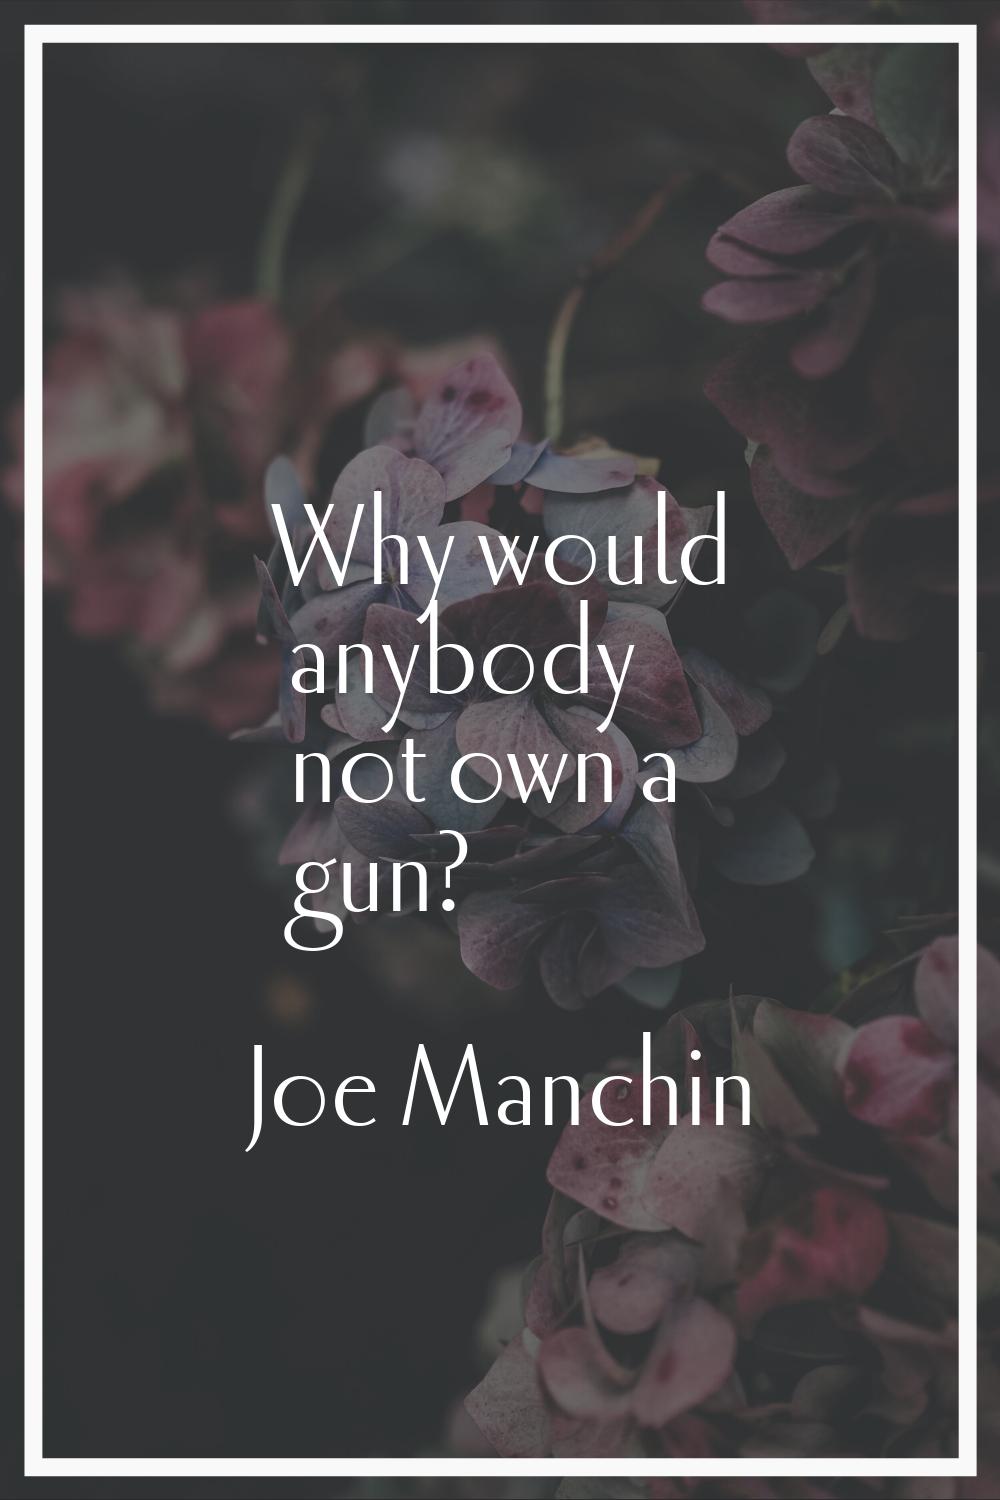 Why would anybody not own a gun?